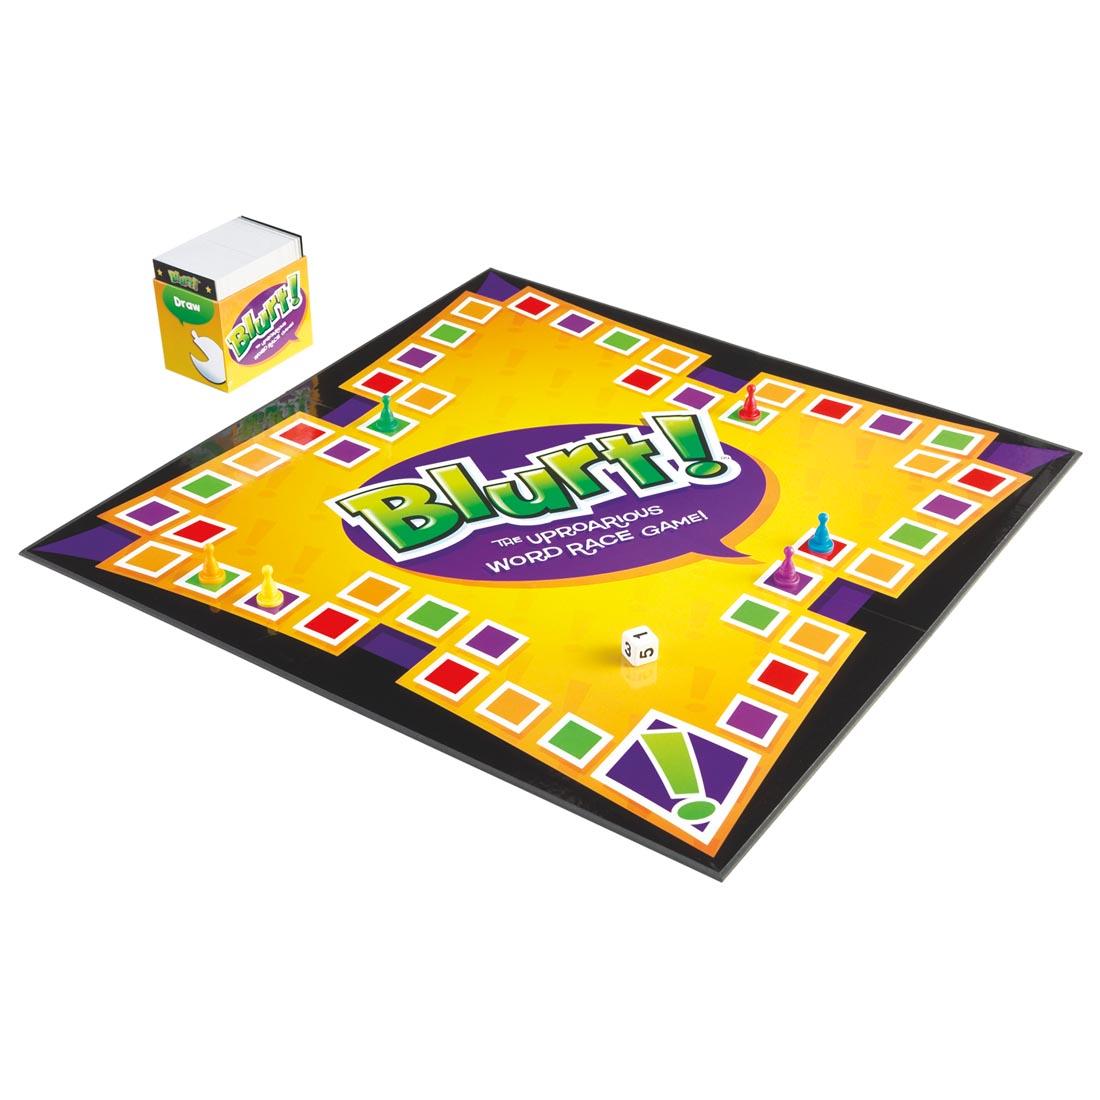 Blurt! game board and cards